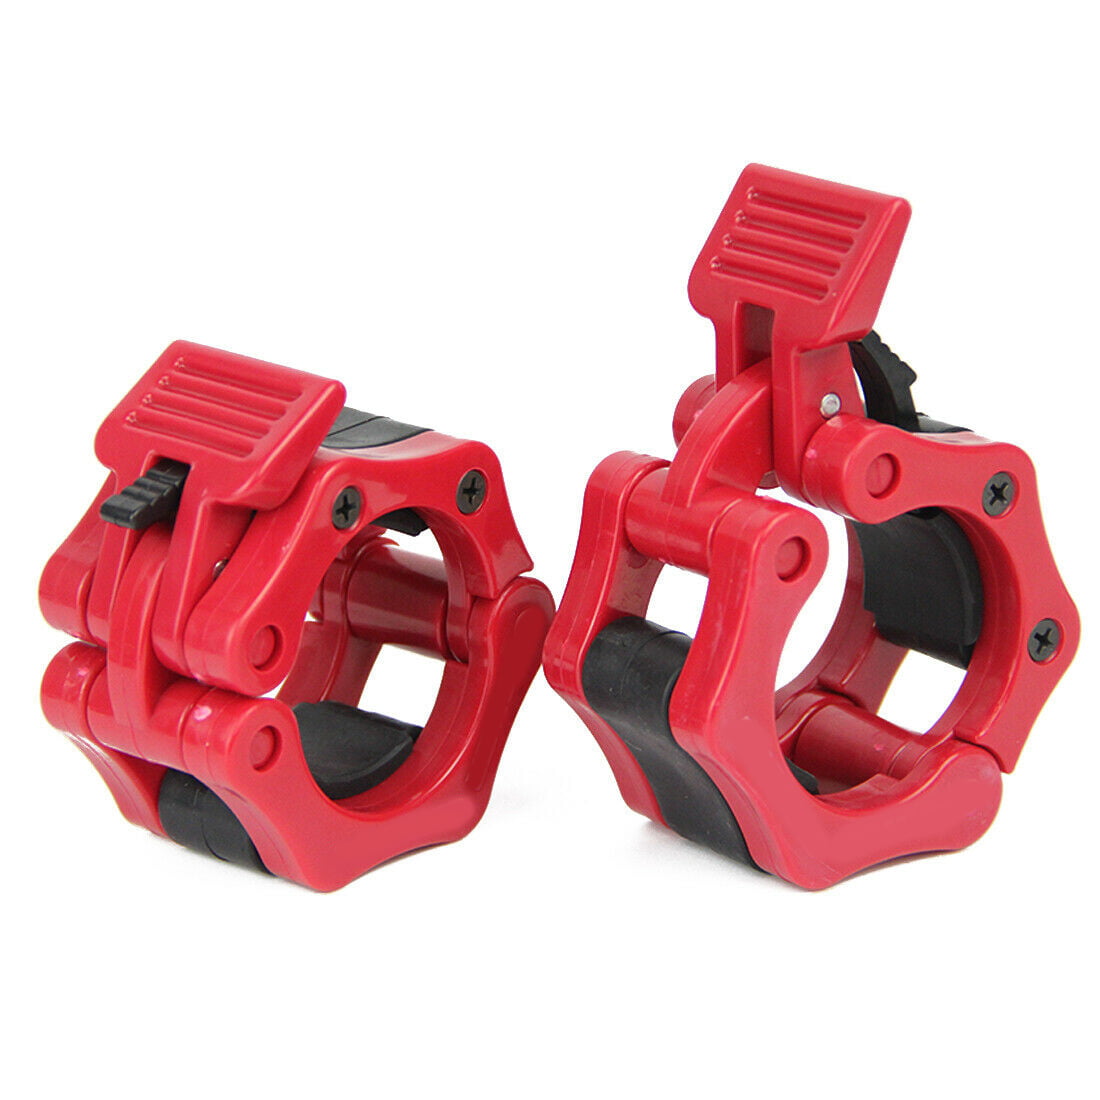 2PCS Gym Standard 1" Weight Barbell Bar Clamps Clips Olympic Spinlock Collars 